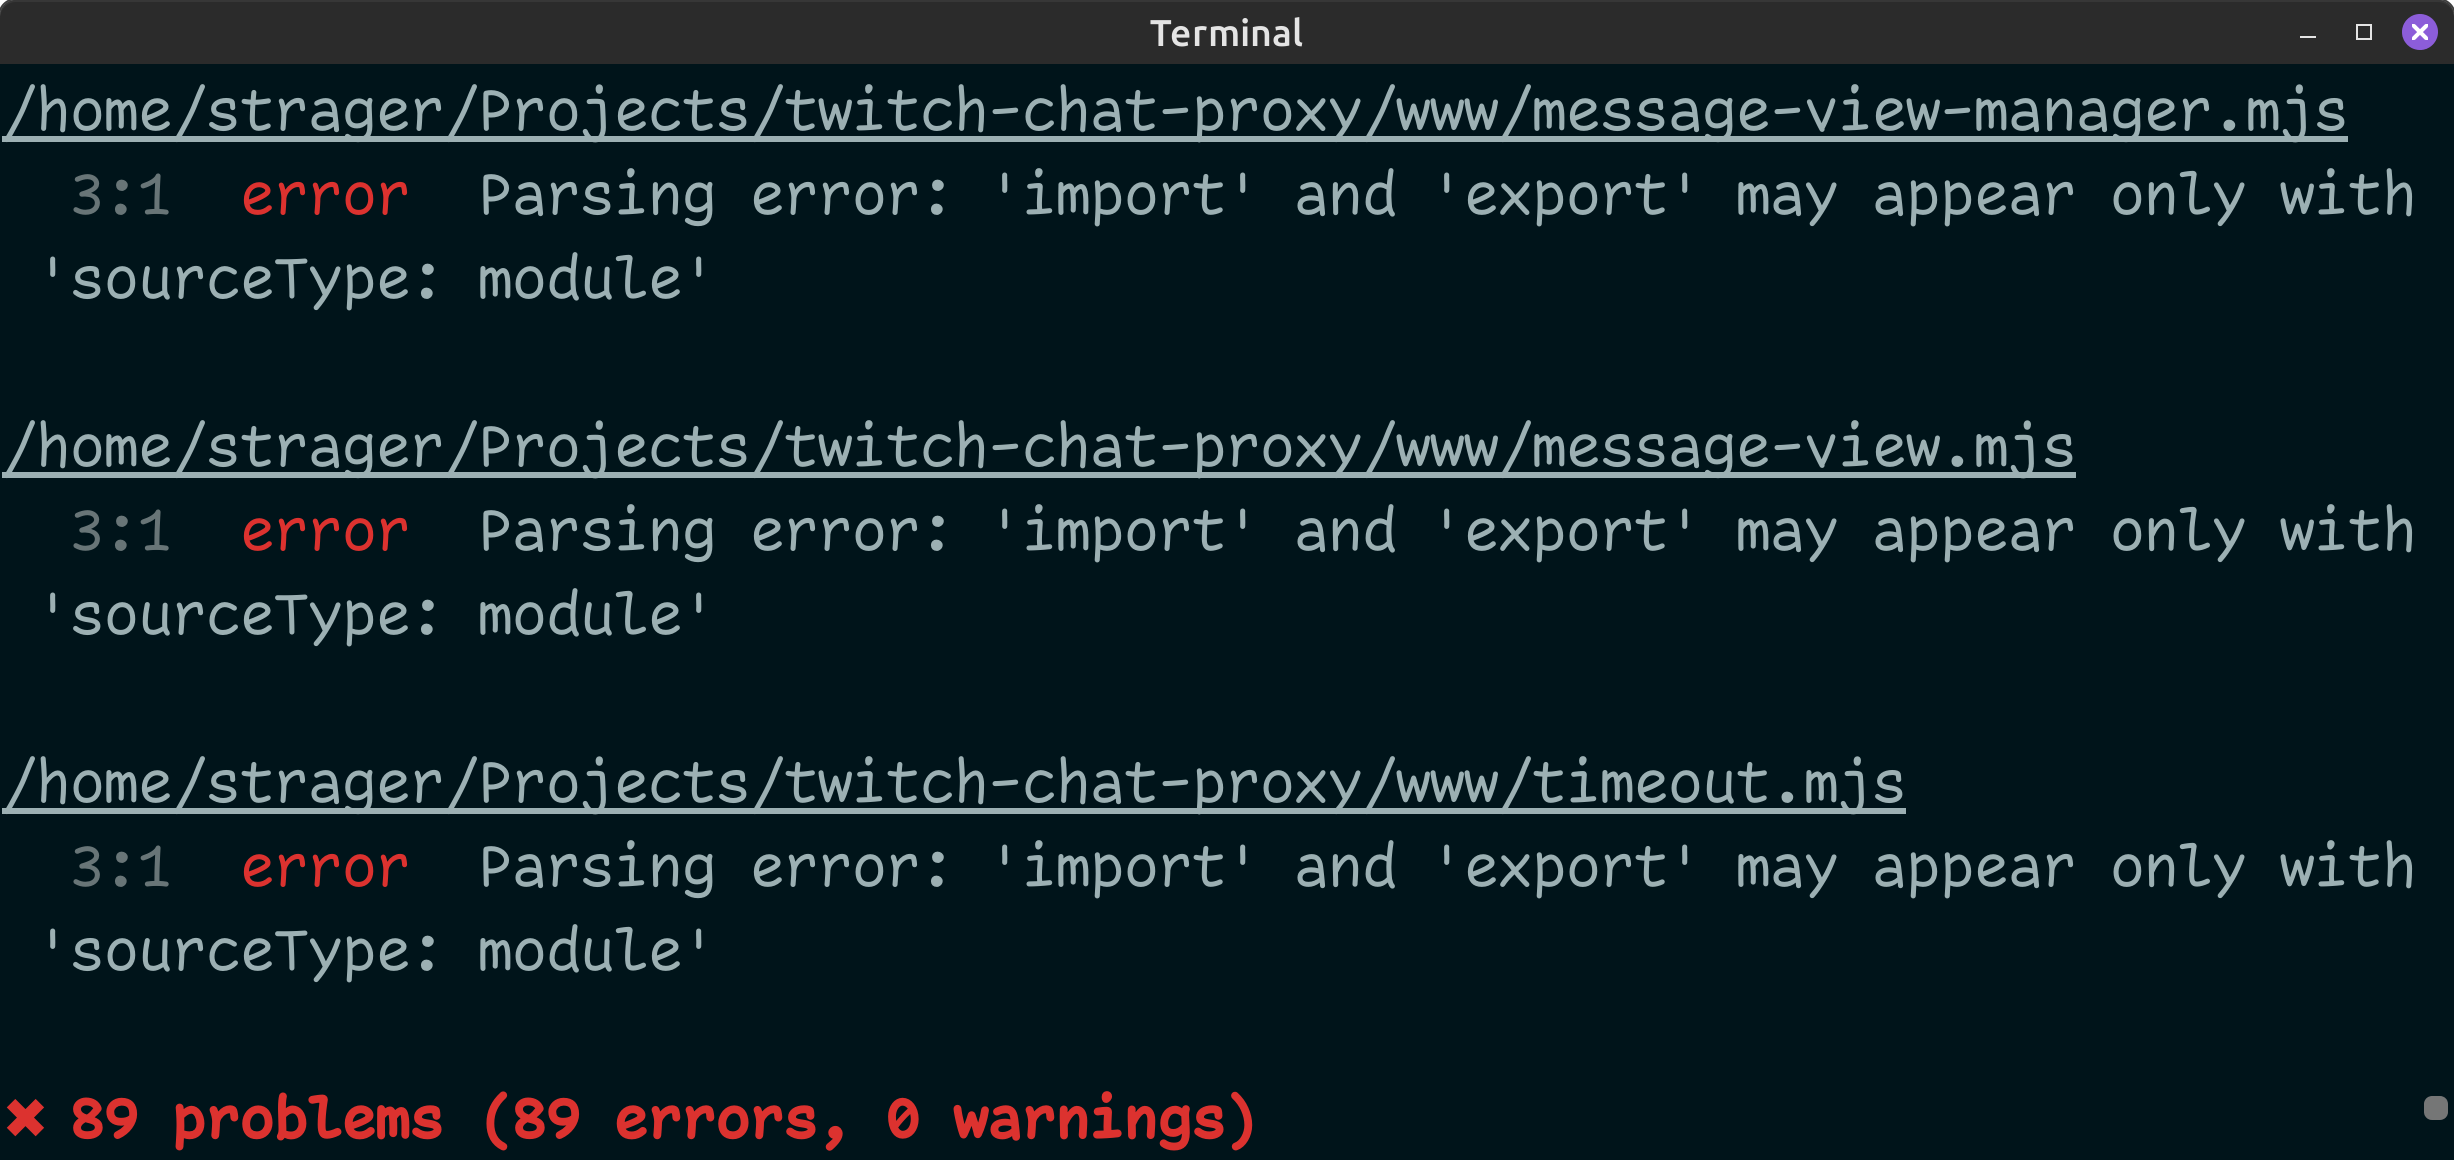 ESLint reporting errors: Parsing error: 'import' and 'export' may appear only with 'sourceType: module'